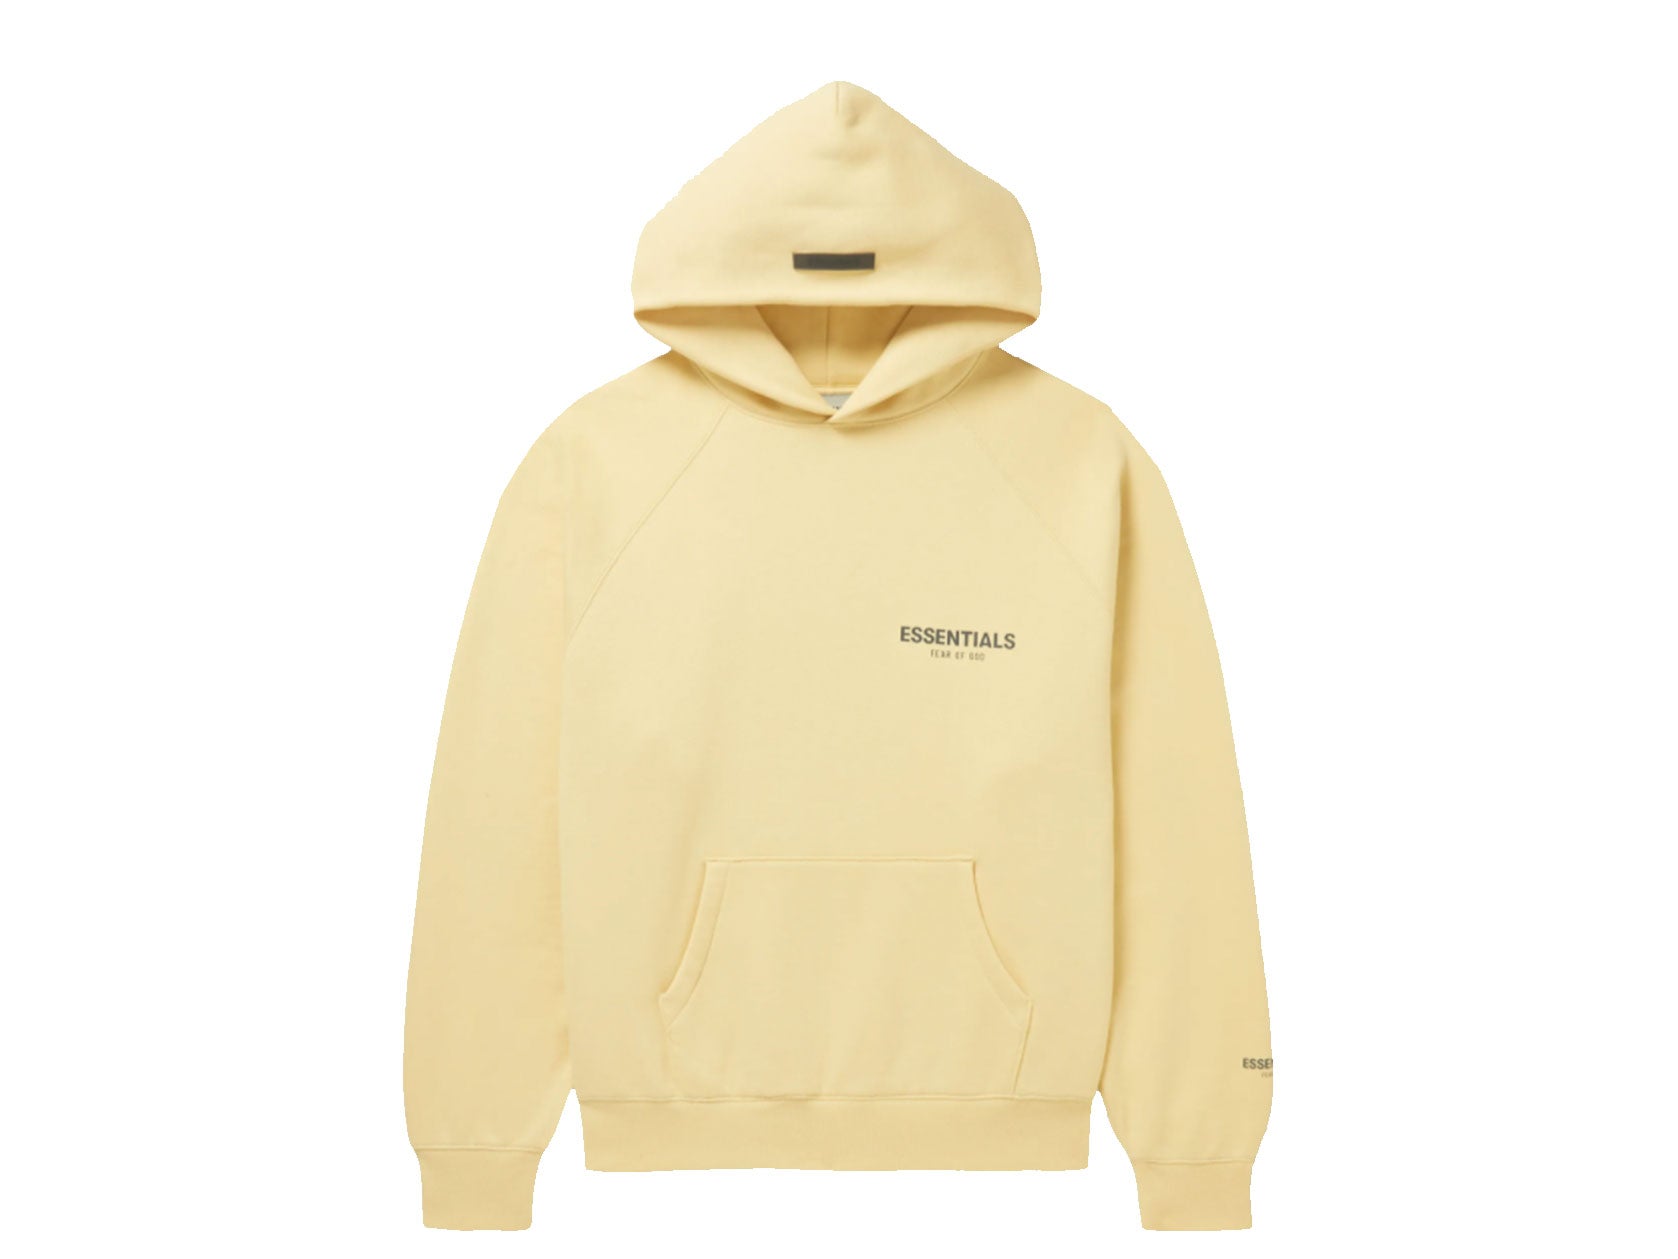 Double Boxed hoodie 134.99 FEAR OF GOD ESSENTIALS CORE PULLOVER HOODIE BUTTERCREAM Double Boxed